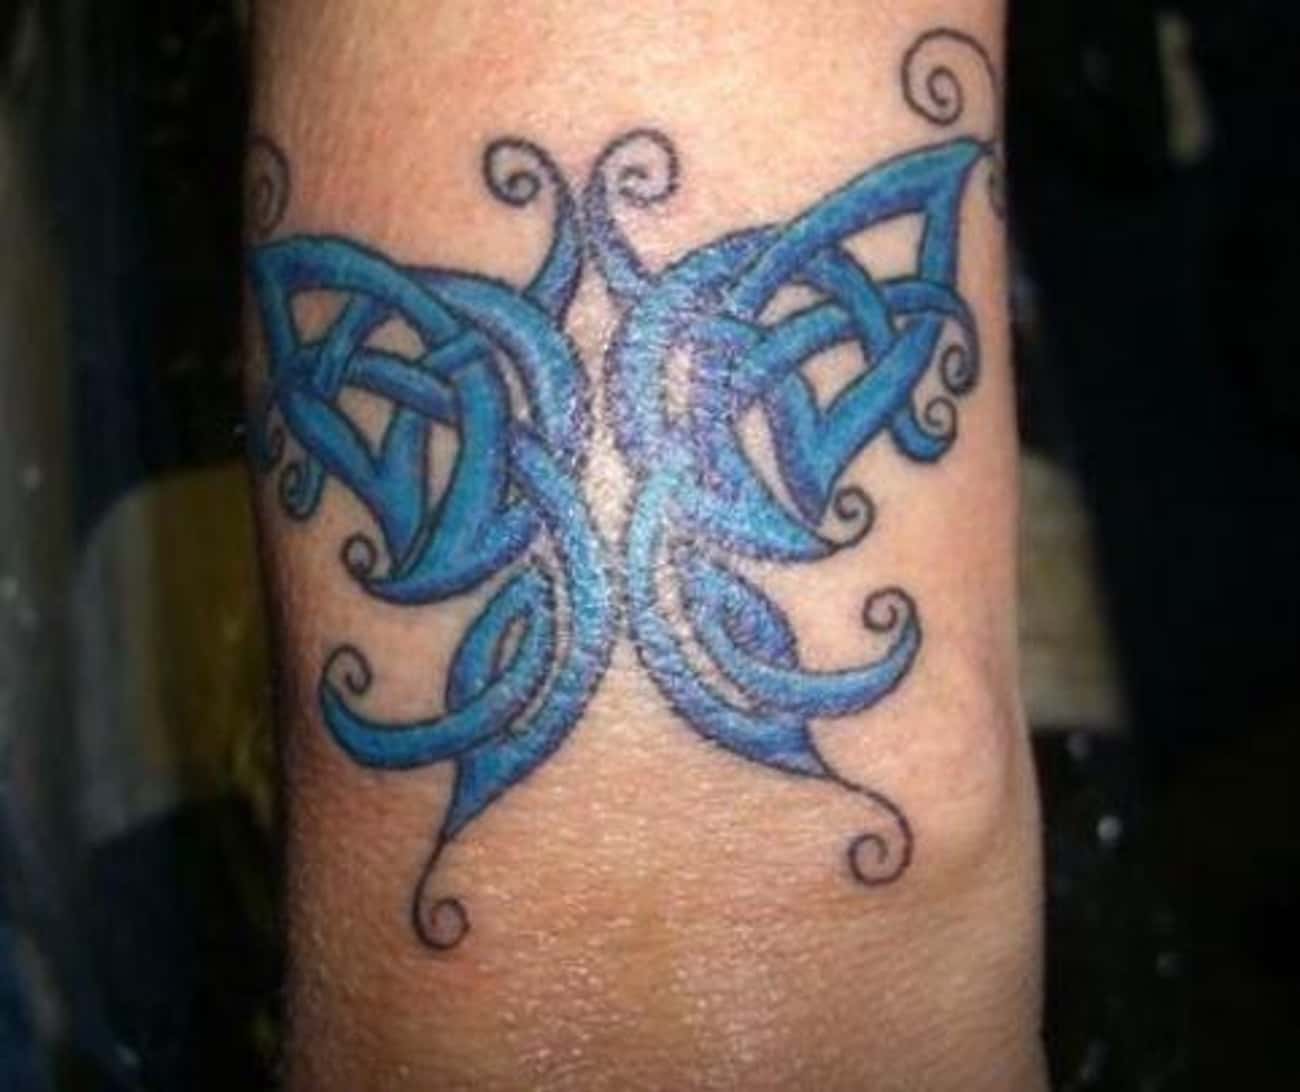 The Celtic Butterfly